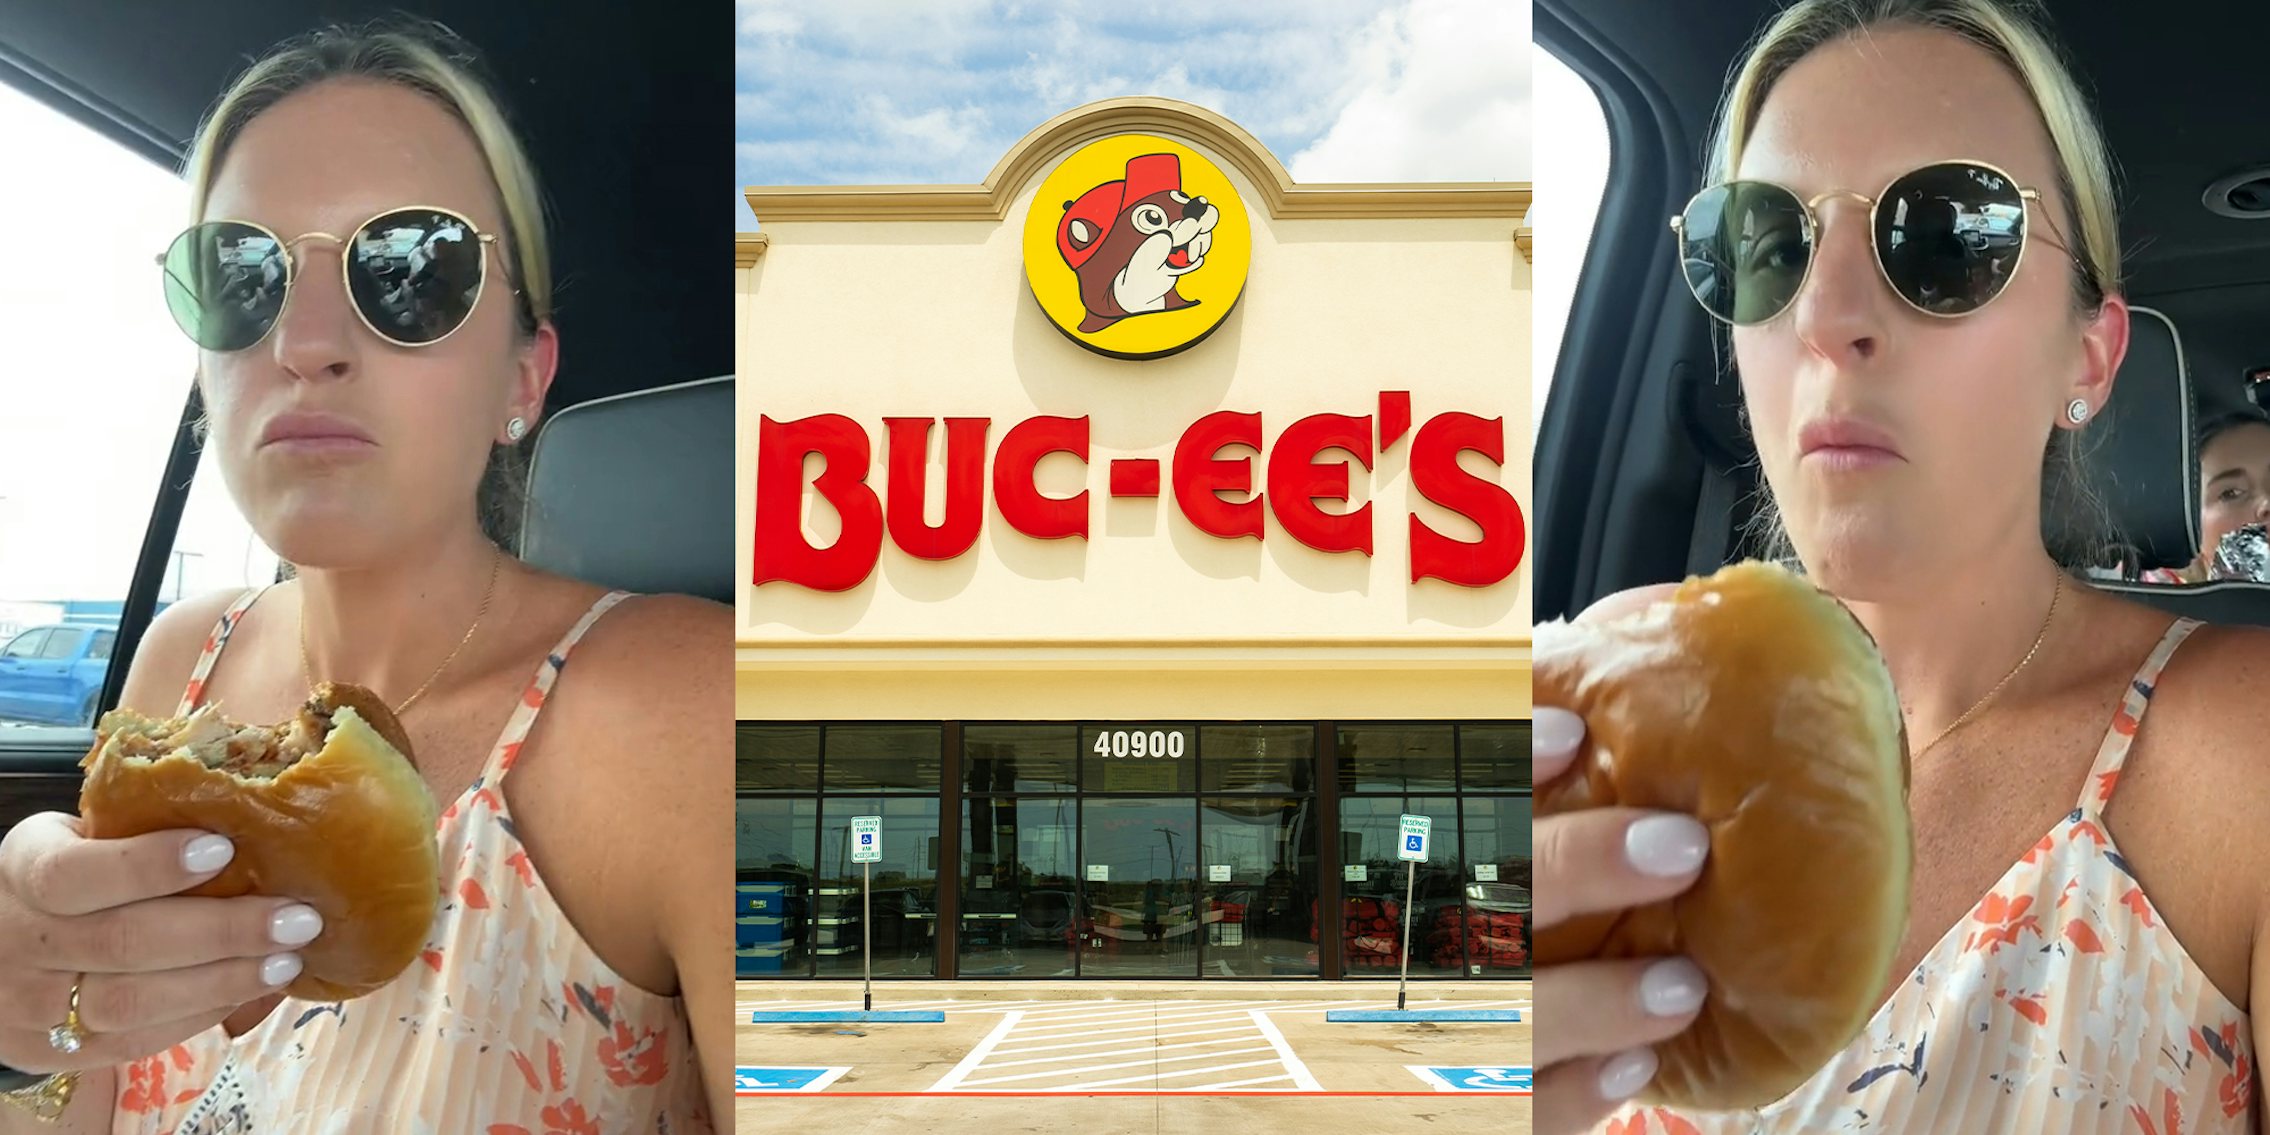 Buc-ee's customers find out salary for unfilled position is $225K, question why it's still unfilled